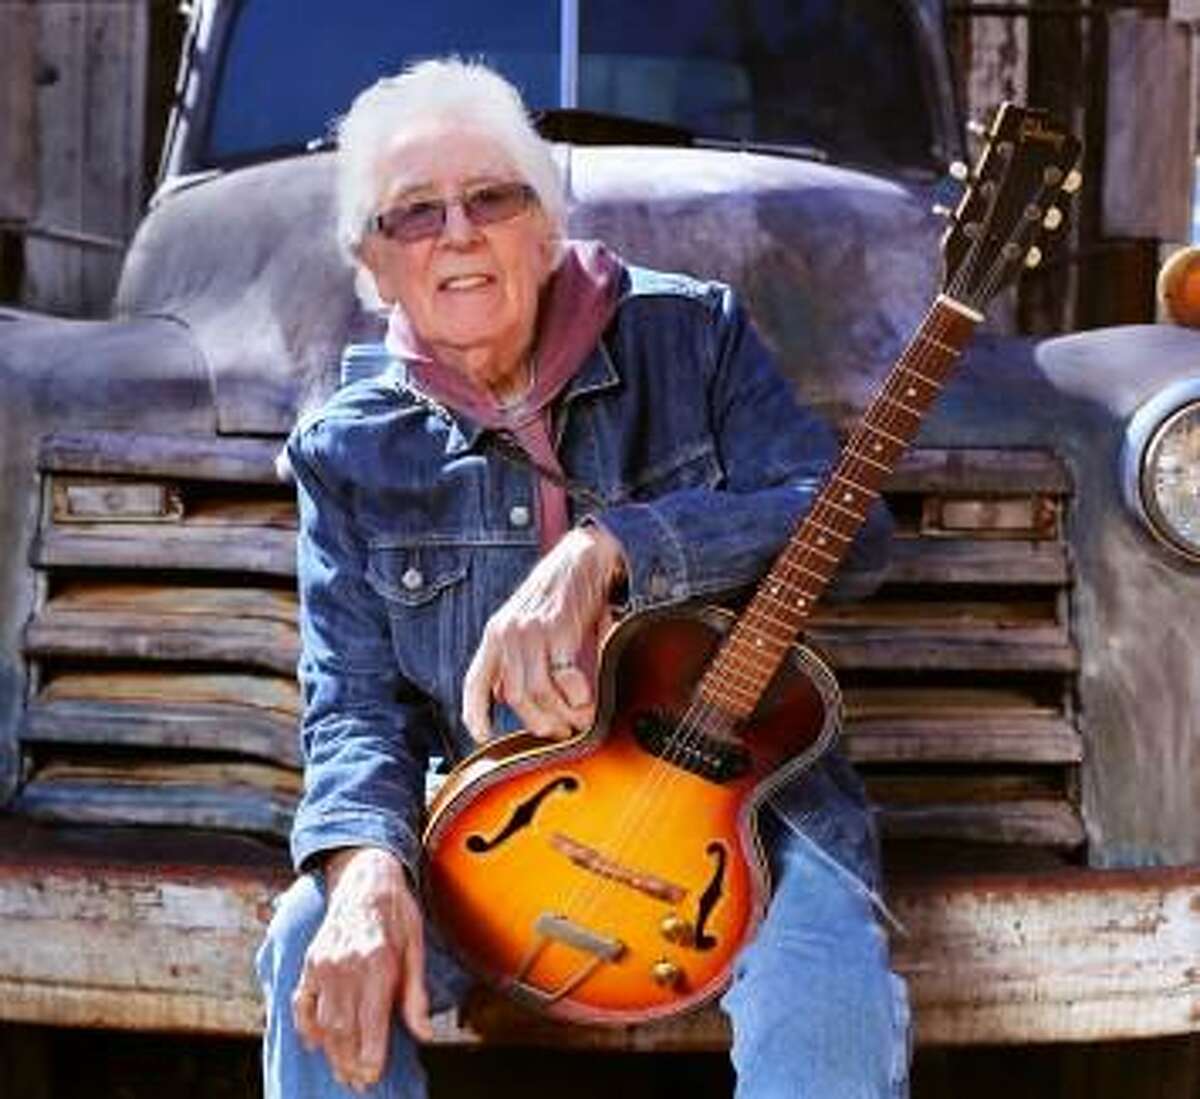 British blues great John Mayall will be at the Fairfield Theatre Company’s StageOne venue Aug. 15.